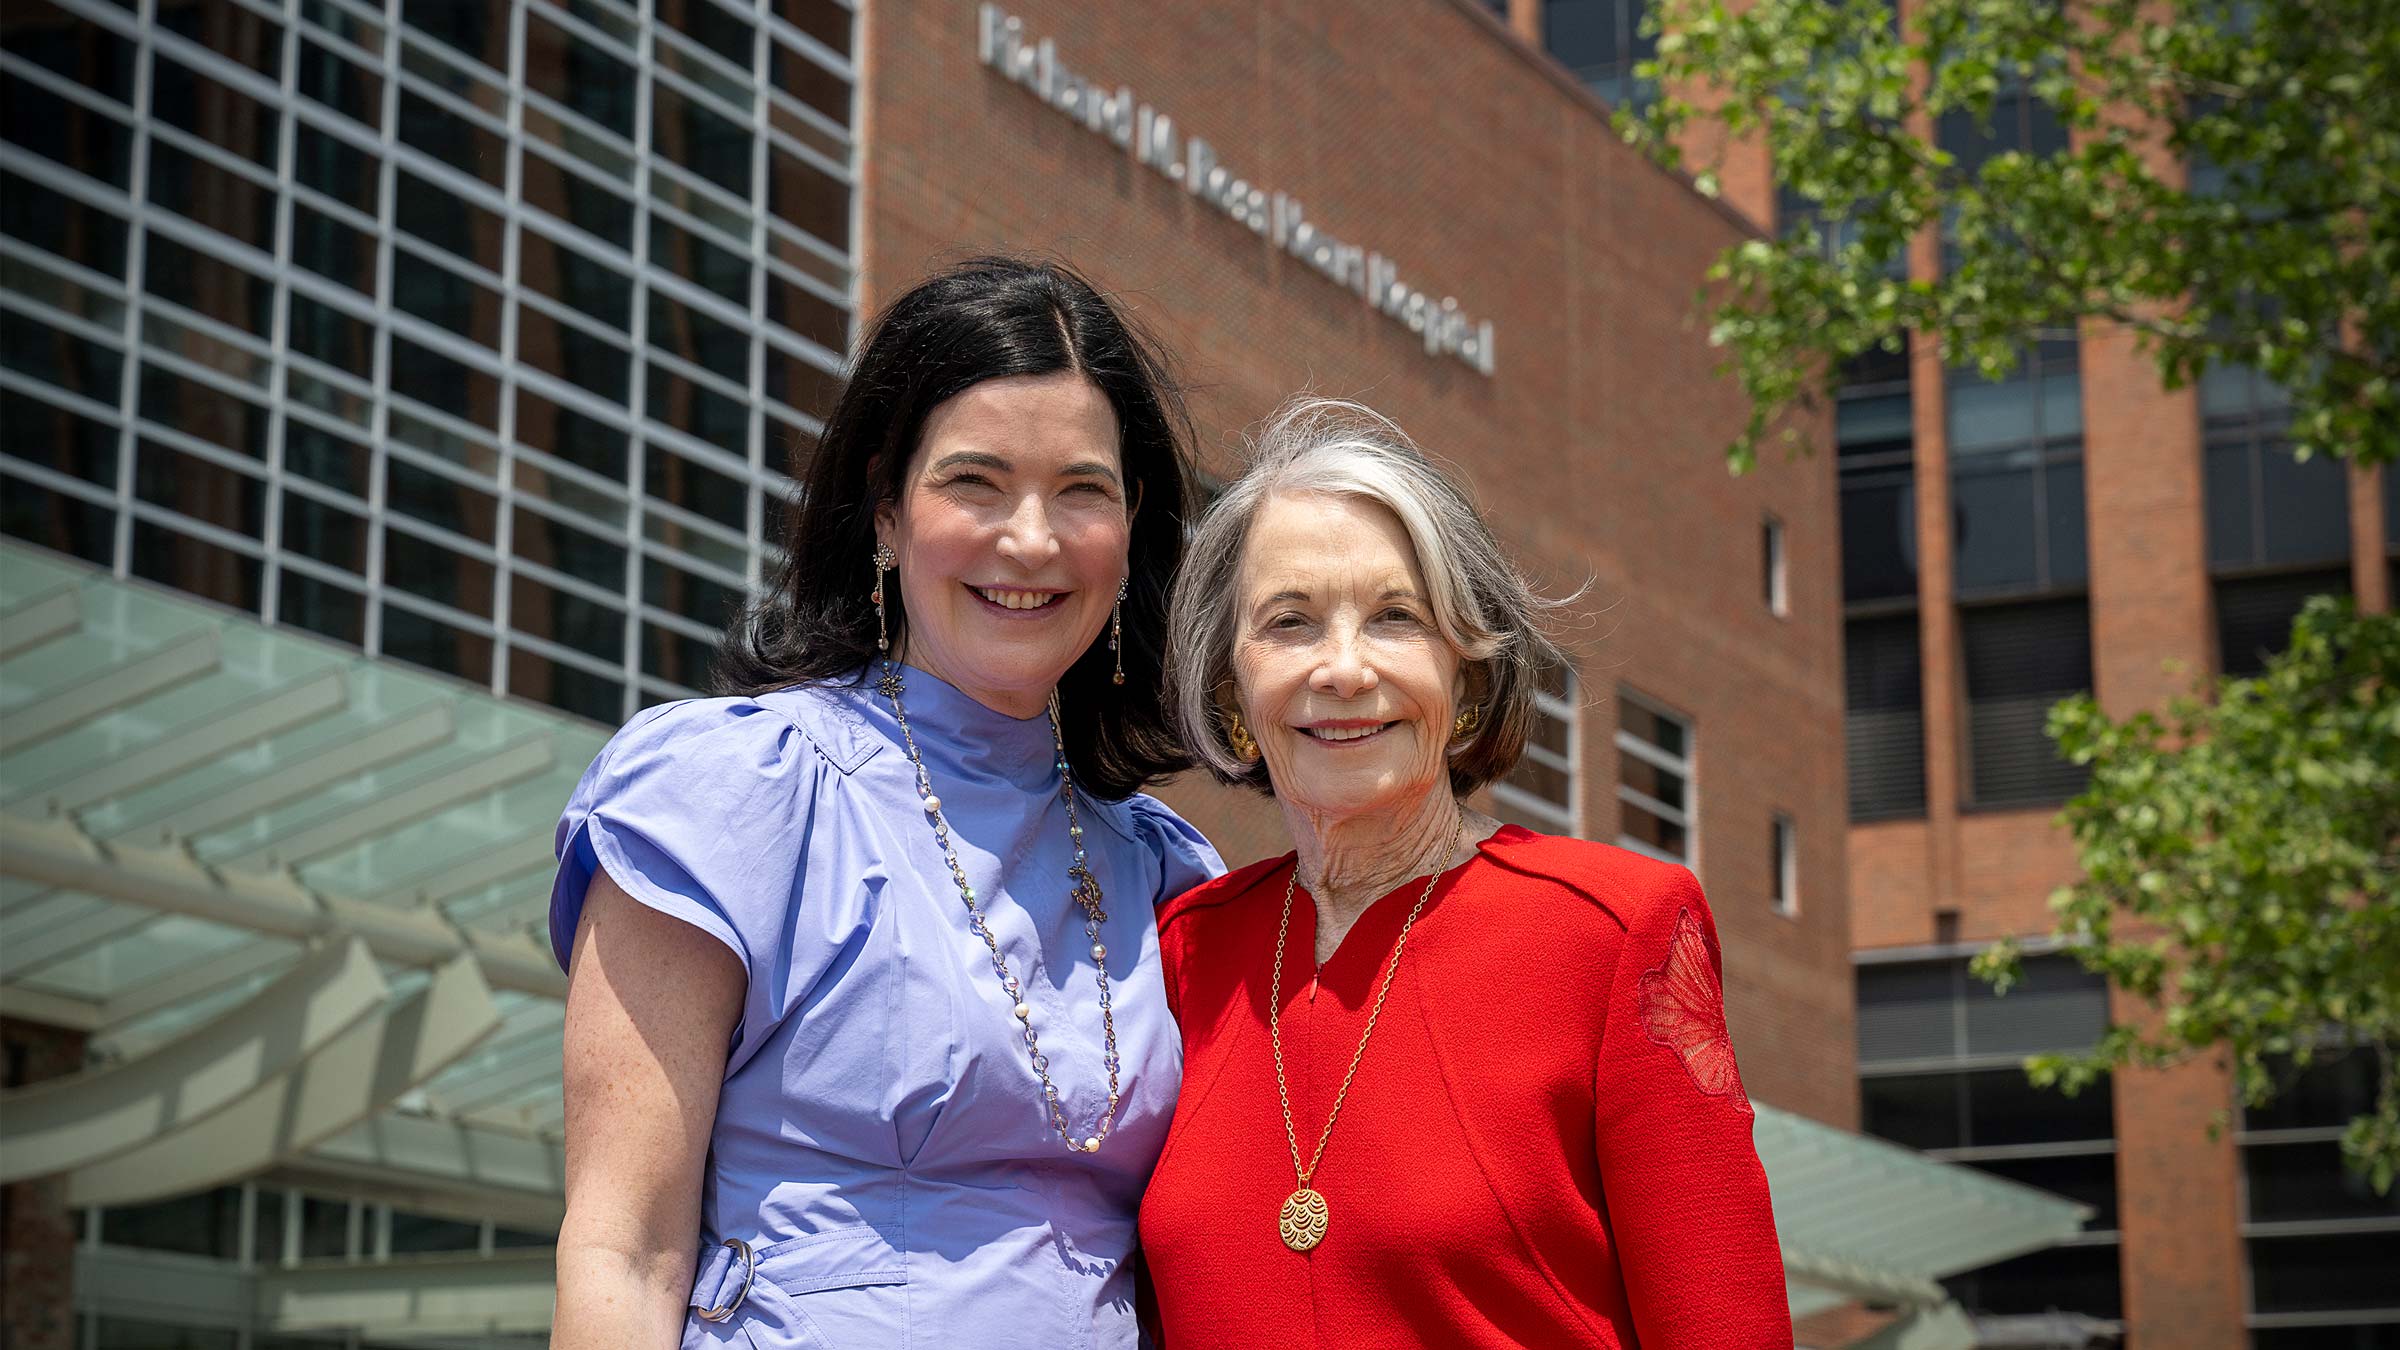 Sarah Kay and Sarah “Sally” Ross Soter standing in front of Ohio State's Ross Heart Hospital